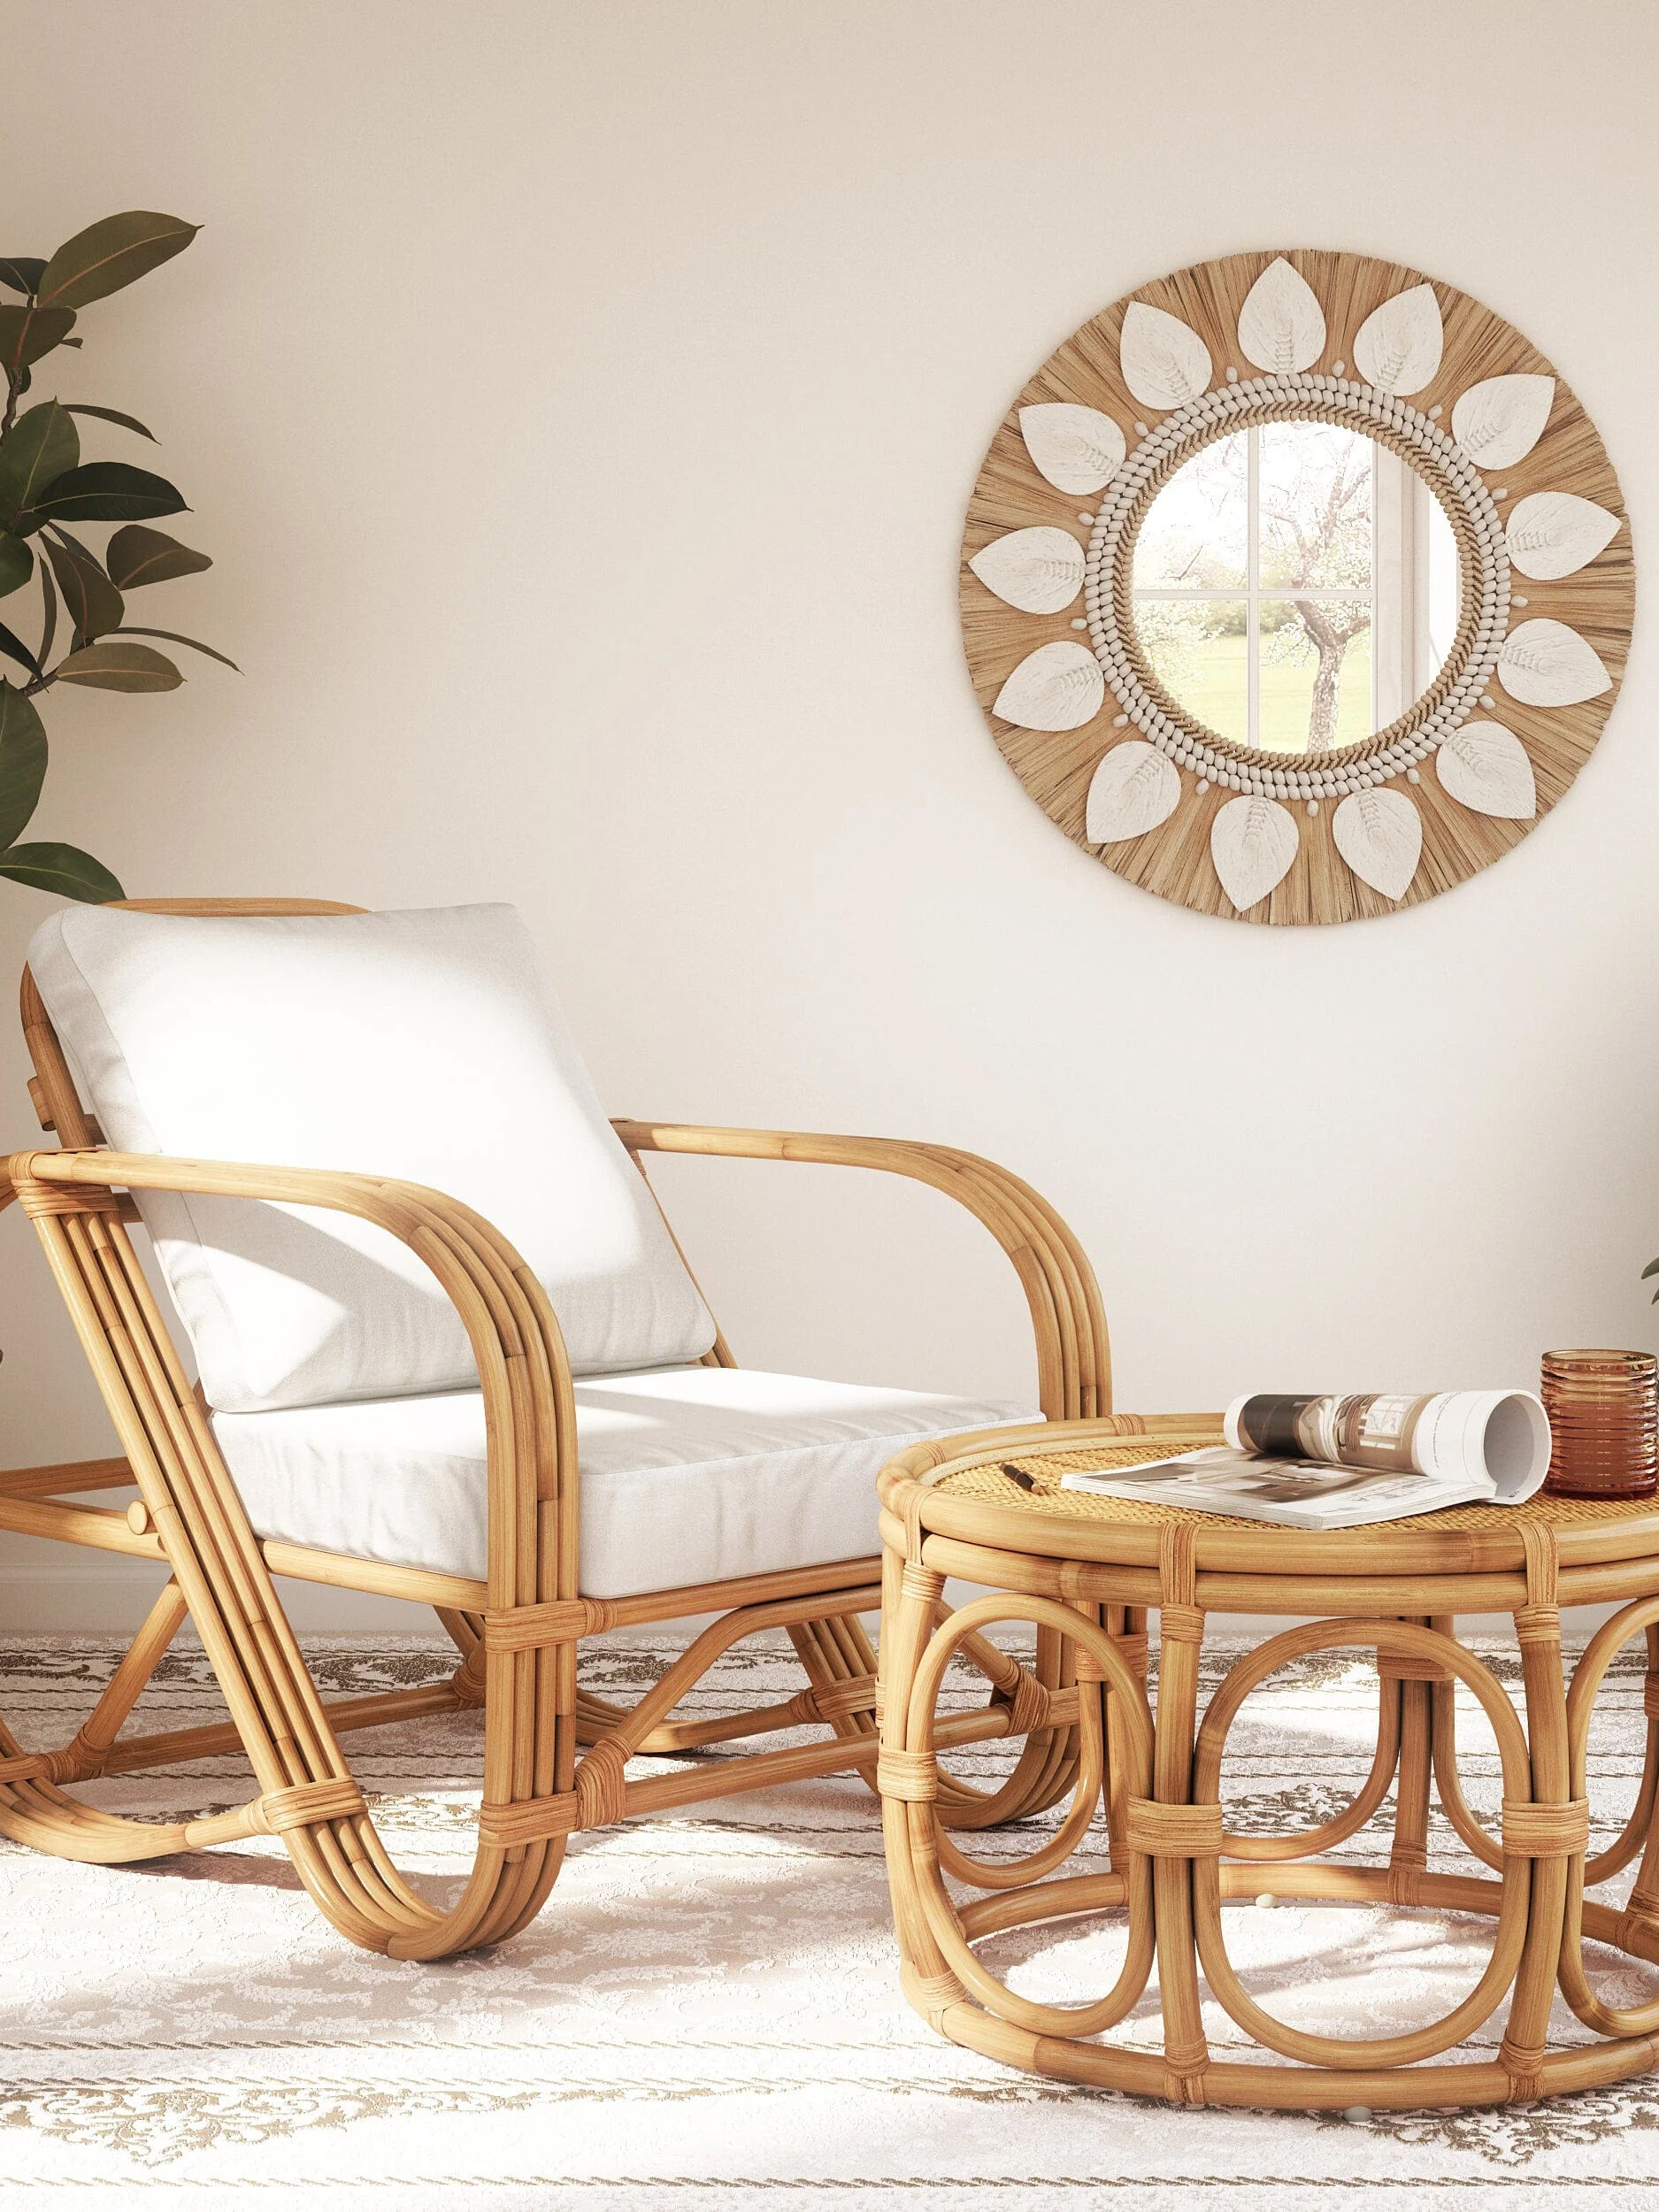 A rattan chair and table in a living room.